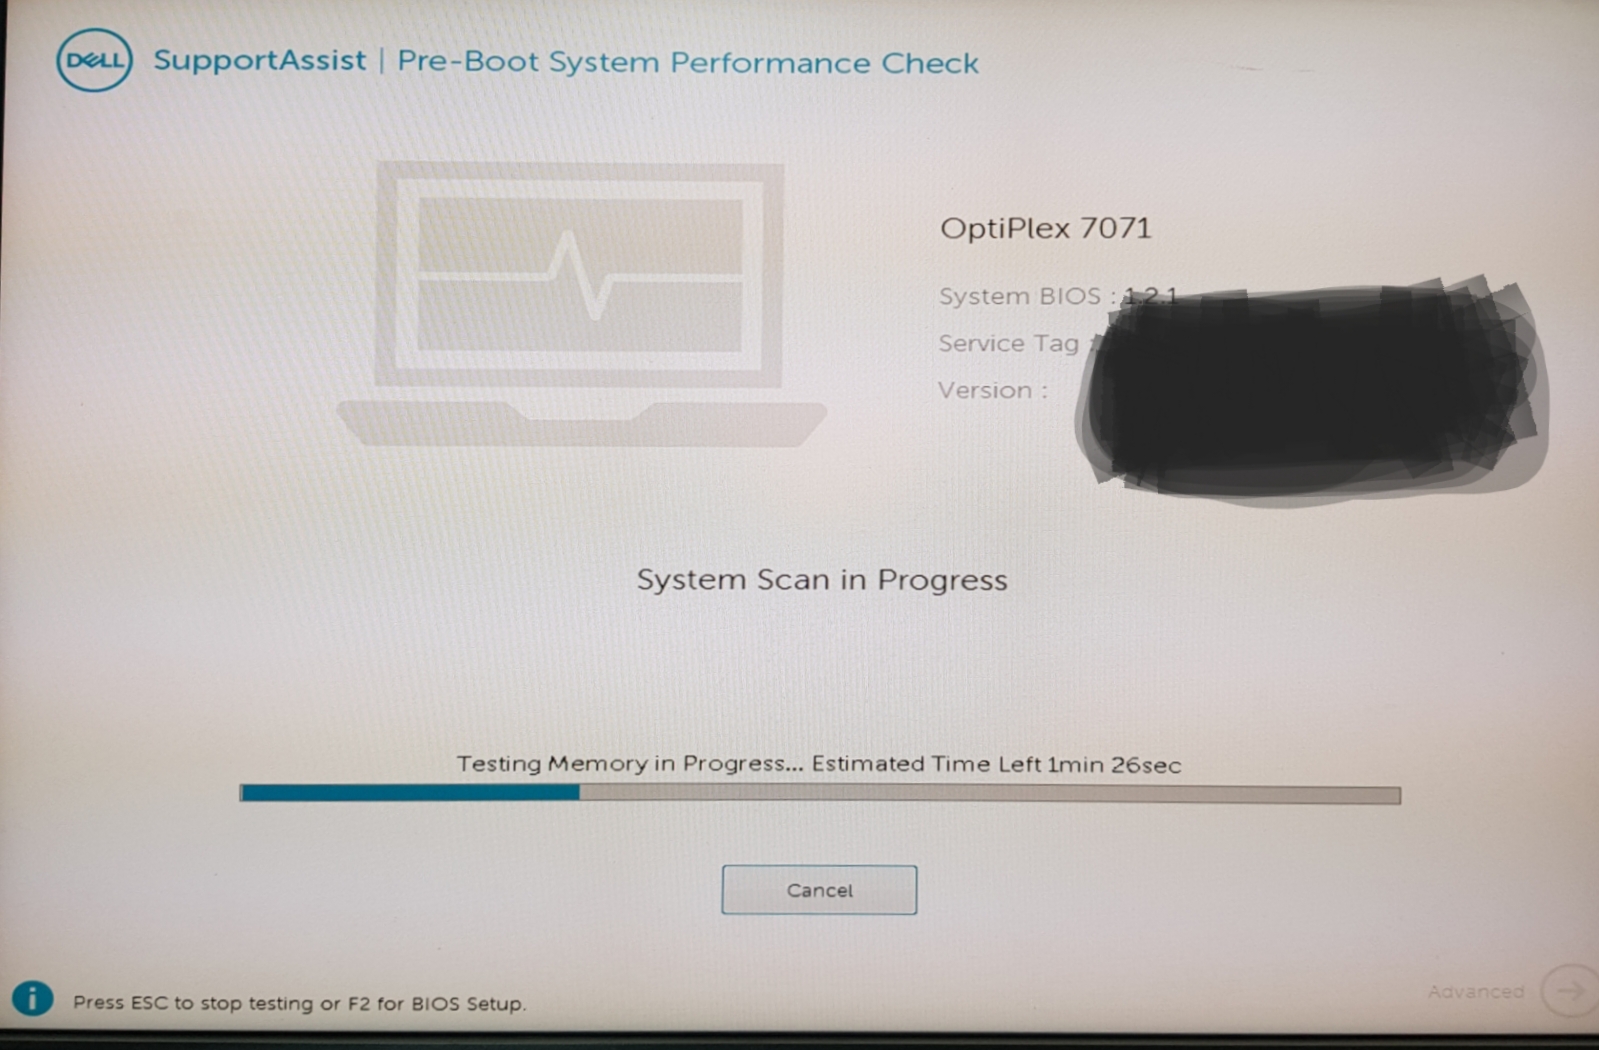 SupportAssist Pre-Boot System Performance Check